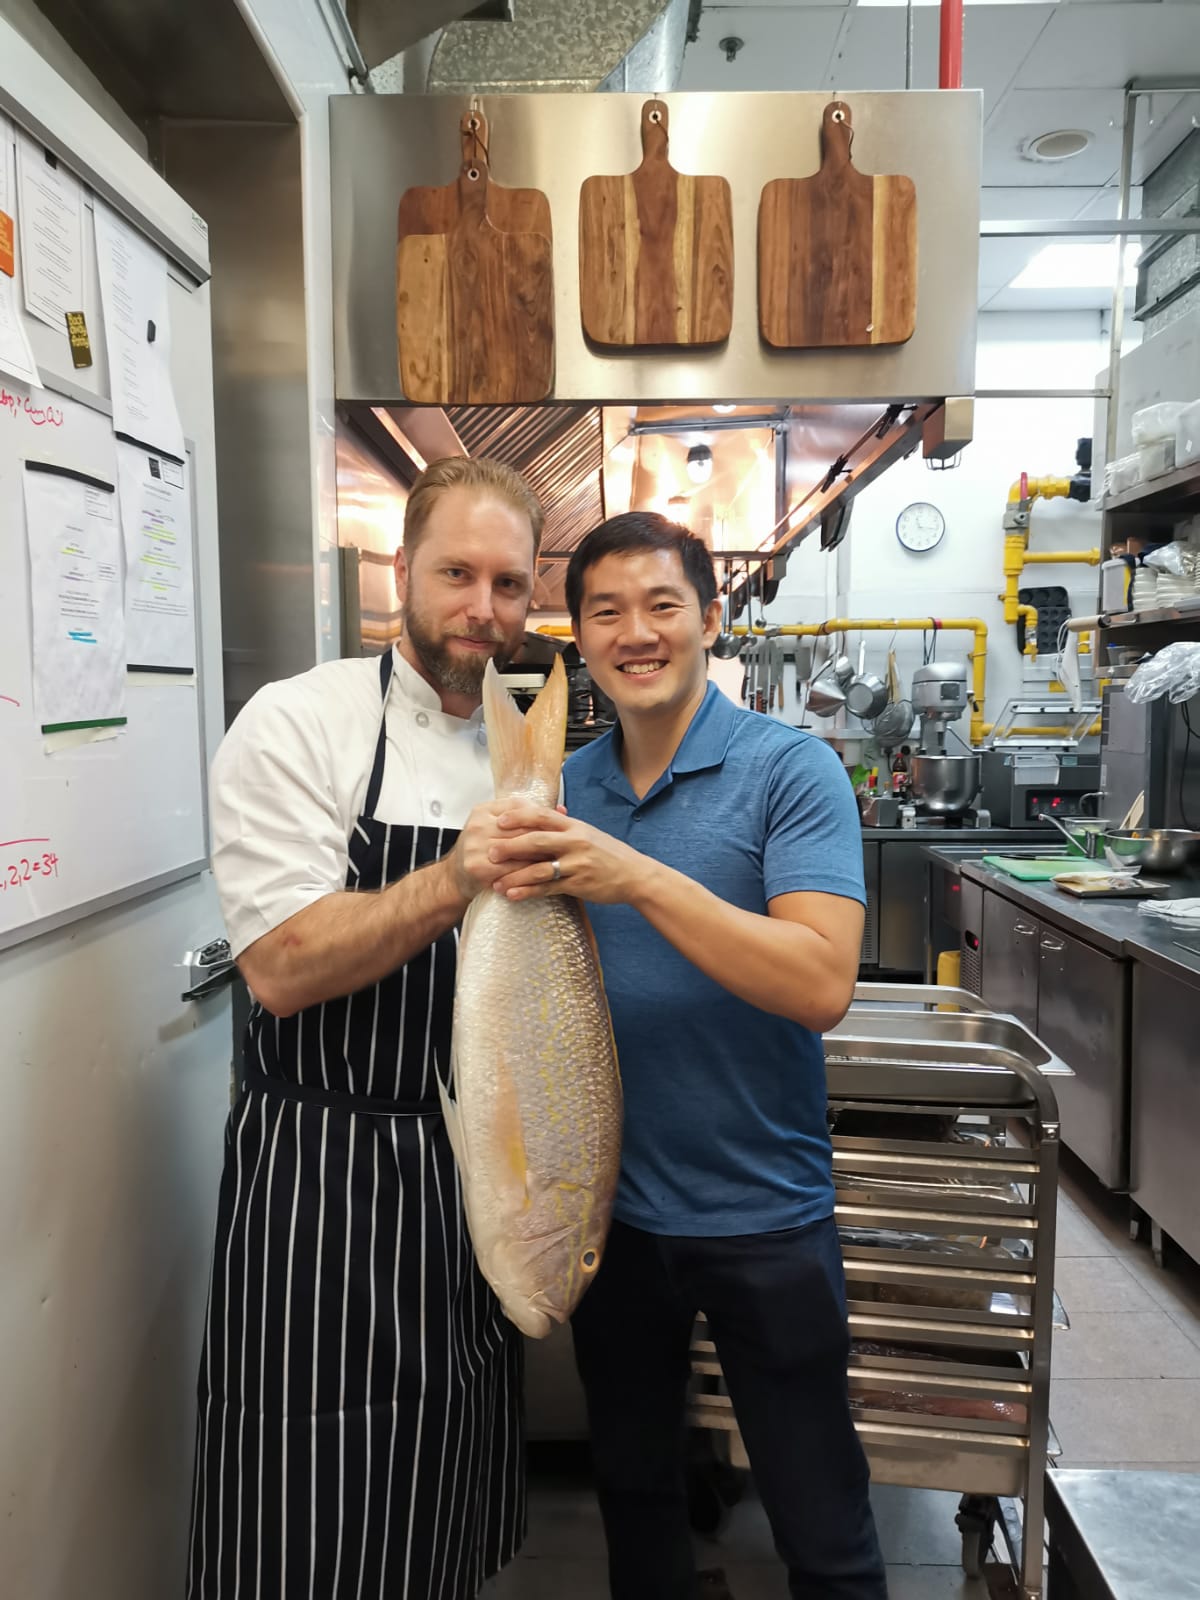 Dishthefish The New Age Fishmonger Brettschneider Cooking School Chef Peter Rollinson Executive Chef Flutes